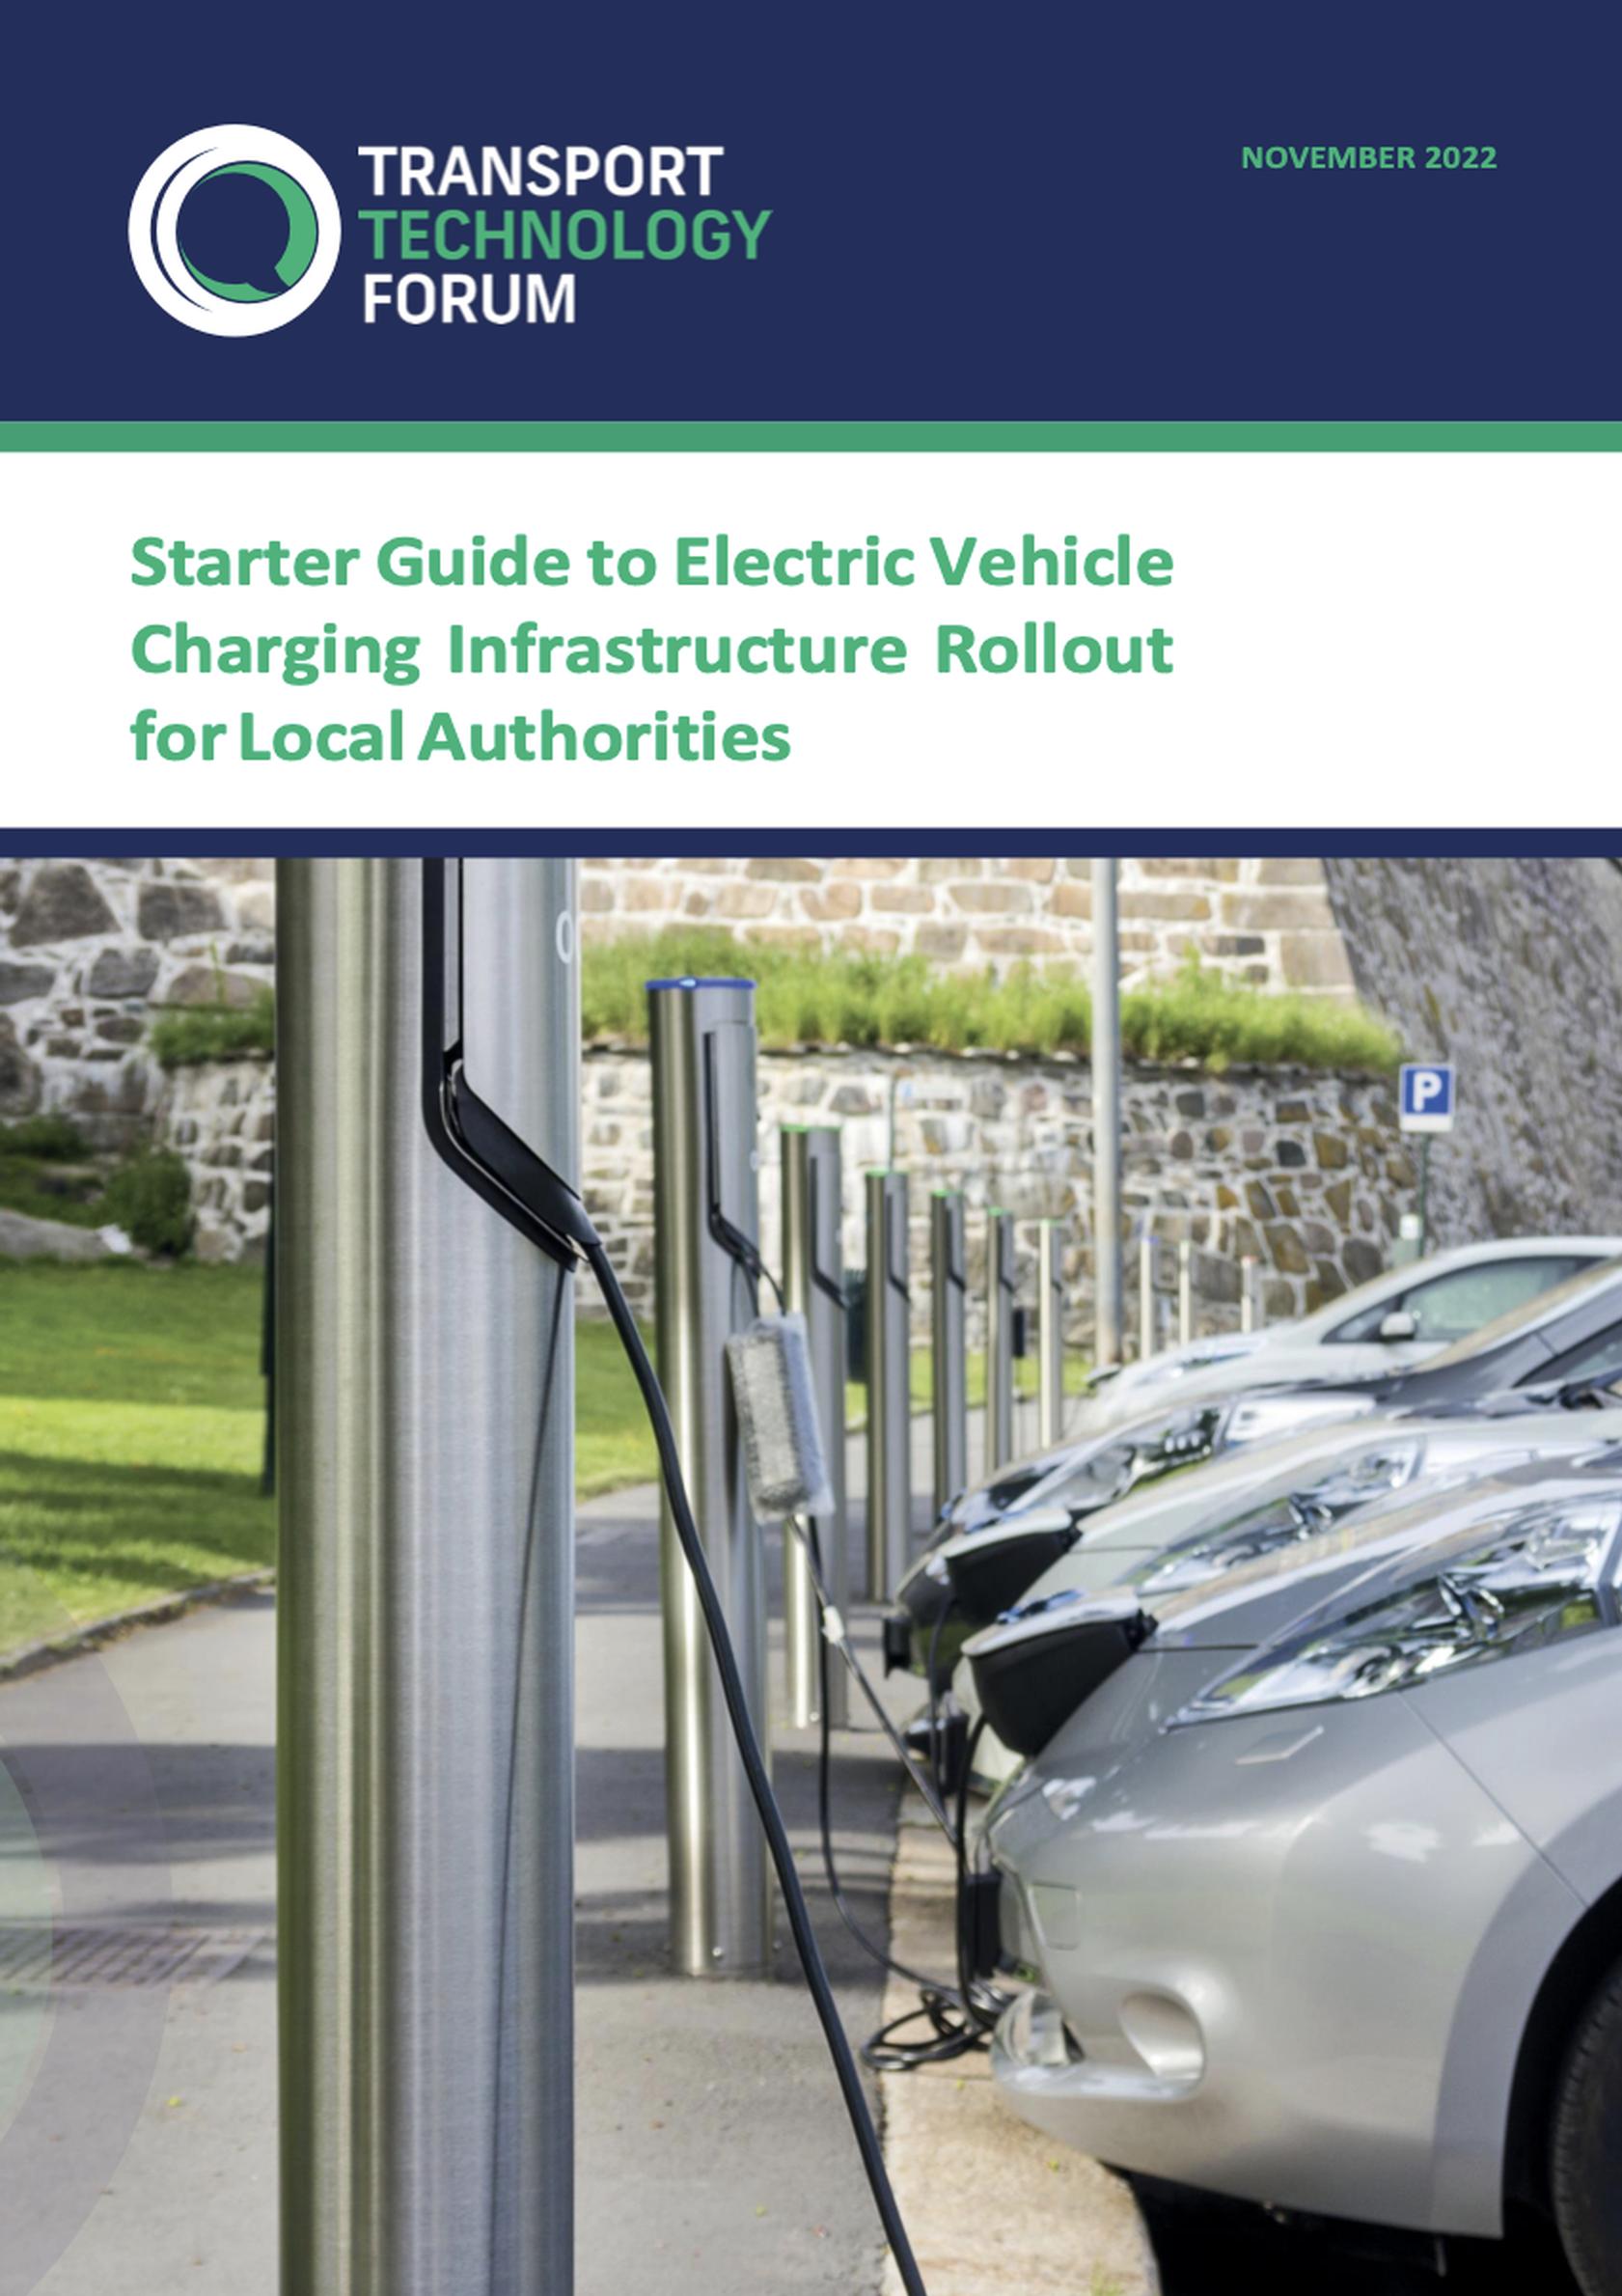 TTF supports local authorities with beginners’ guide to EV charging roll-out